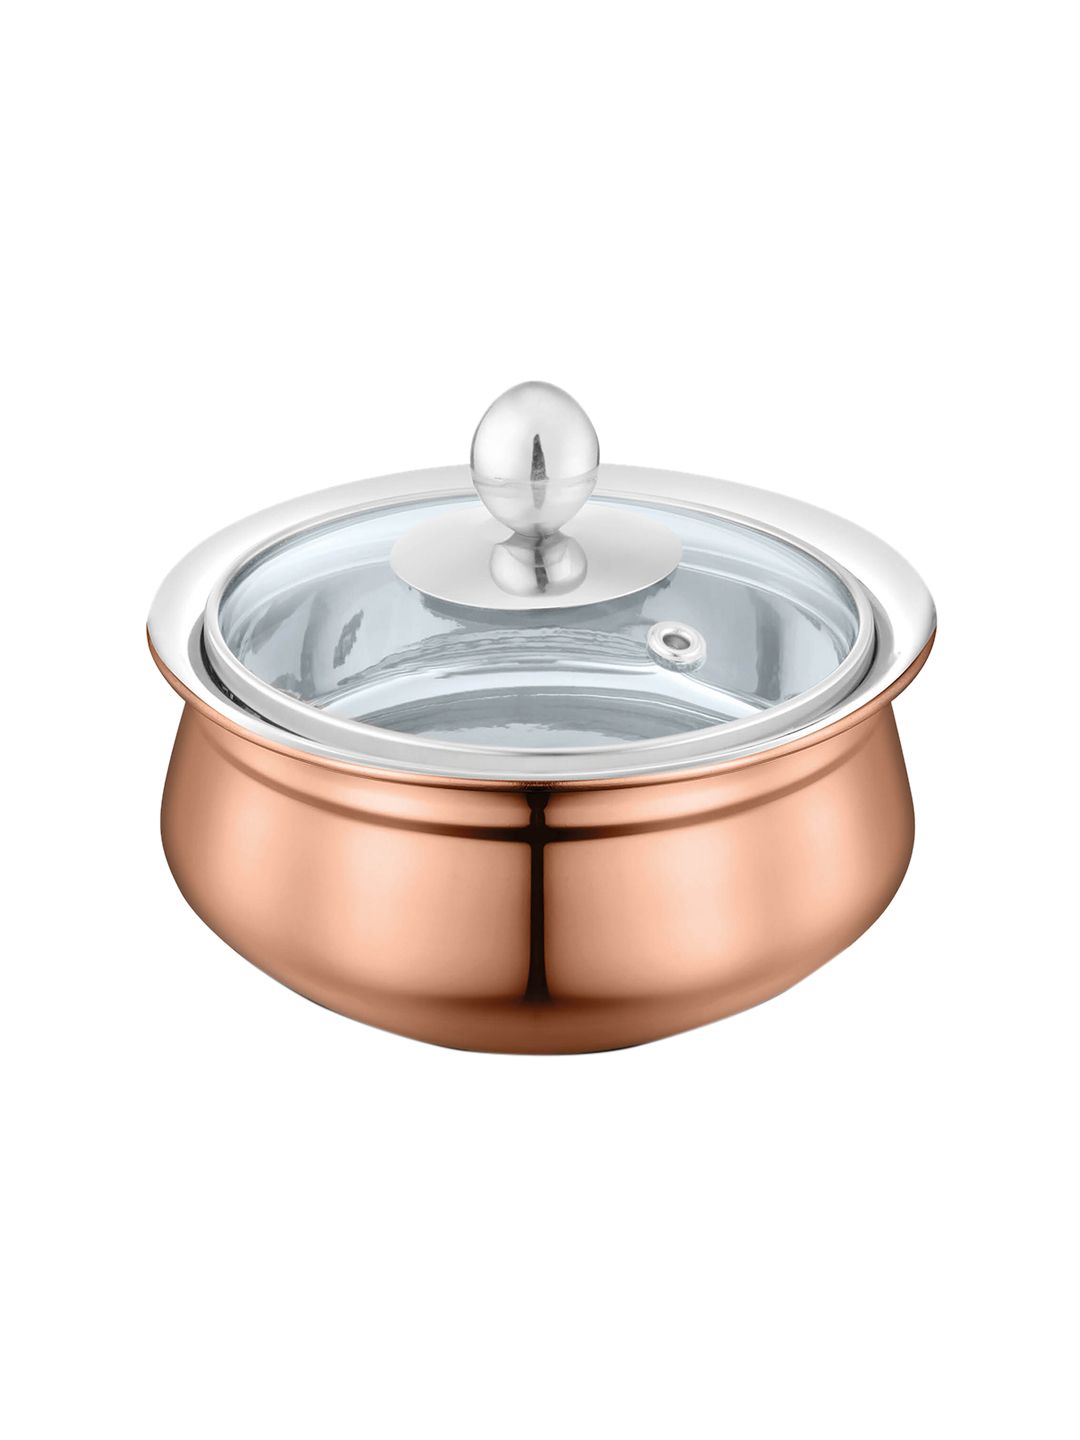 FNS Copper-Toned & Transparent Solid Serving Handi With Lid Price in India